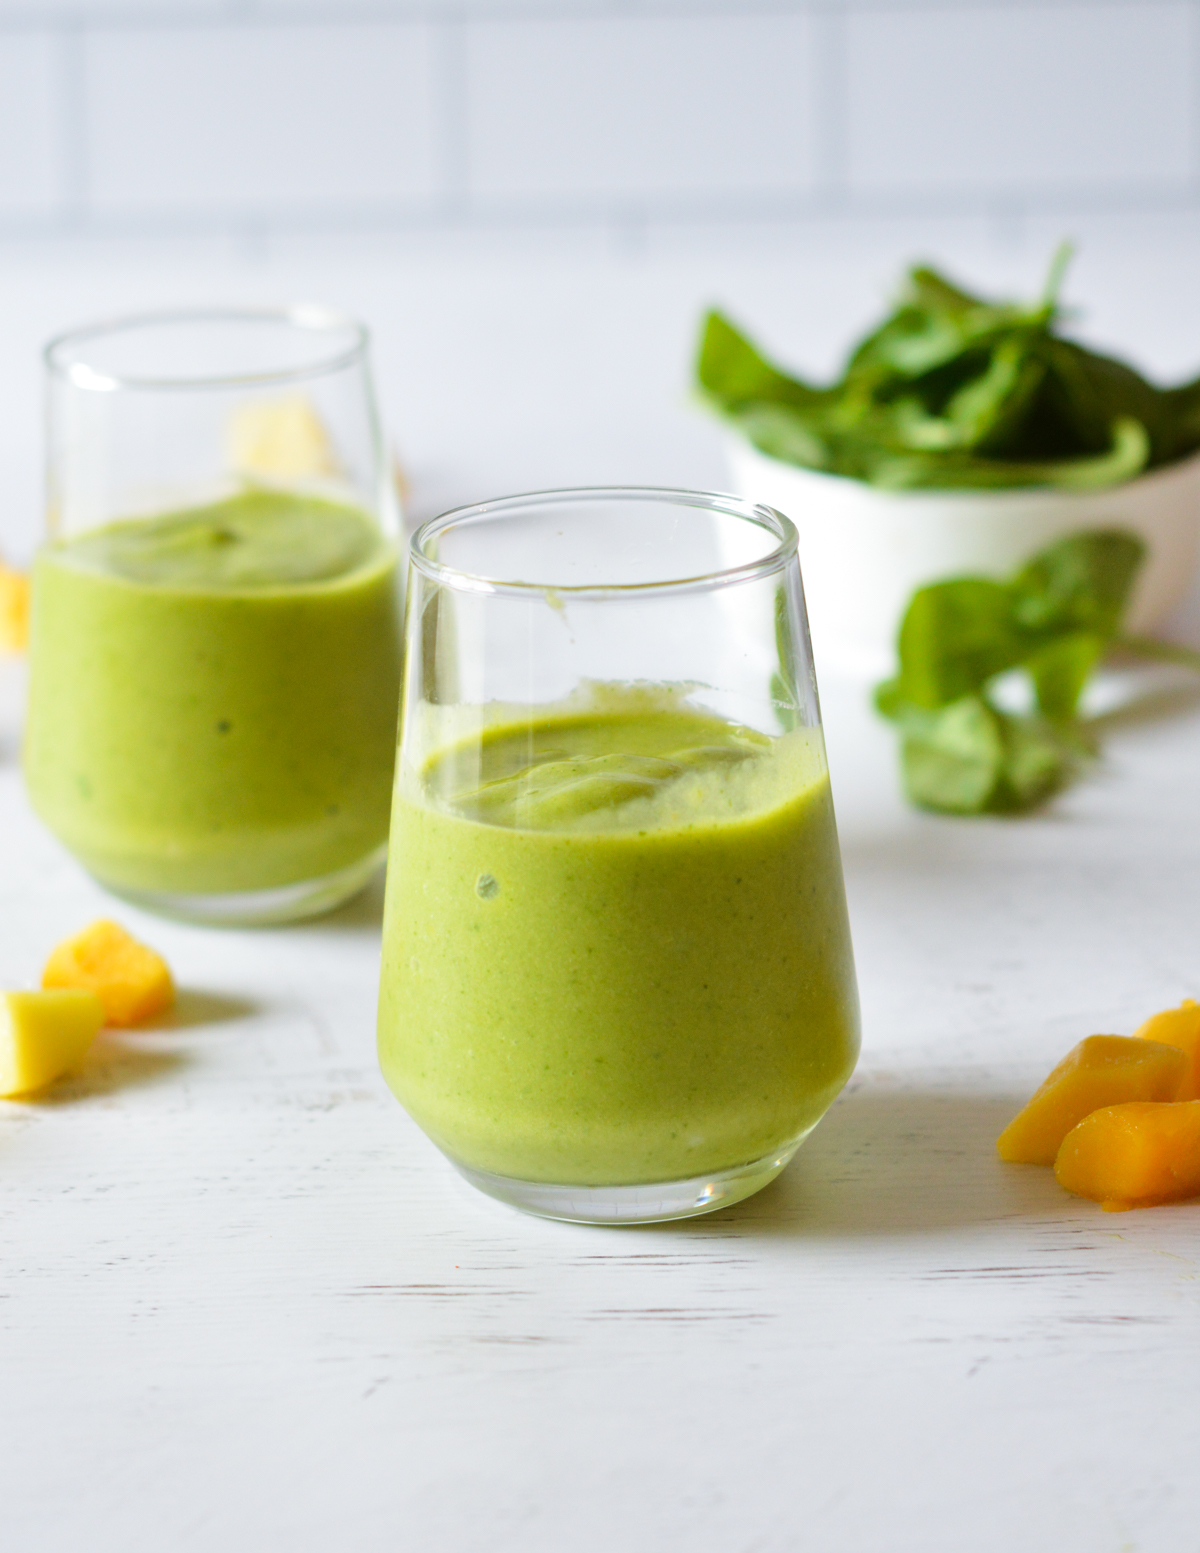 green smoothies.